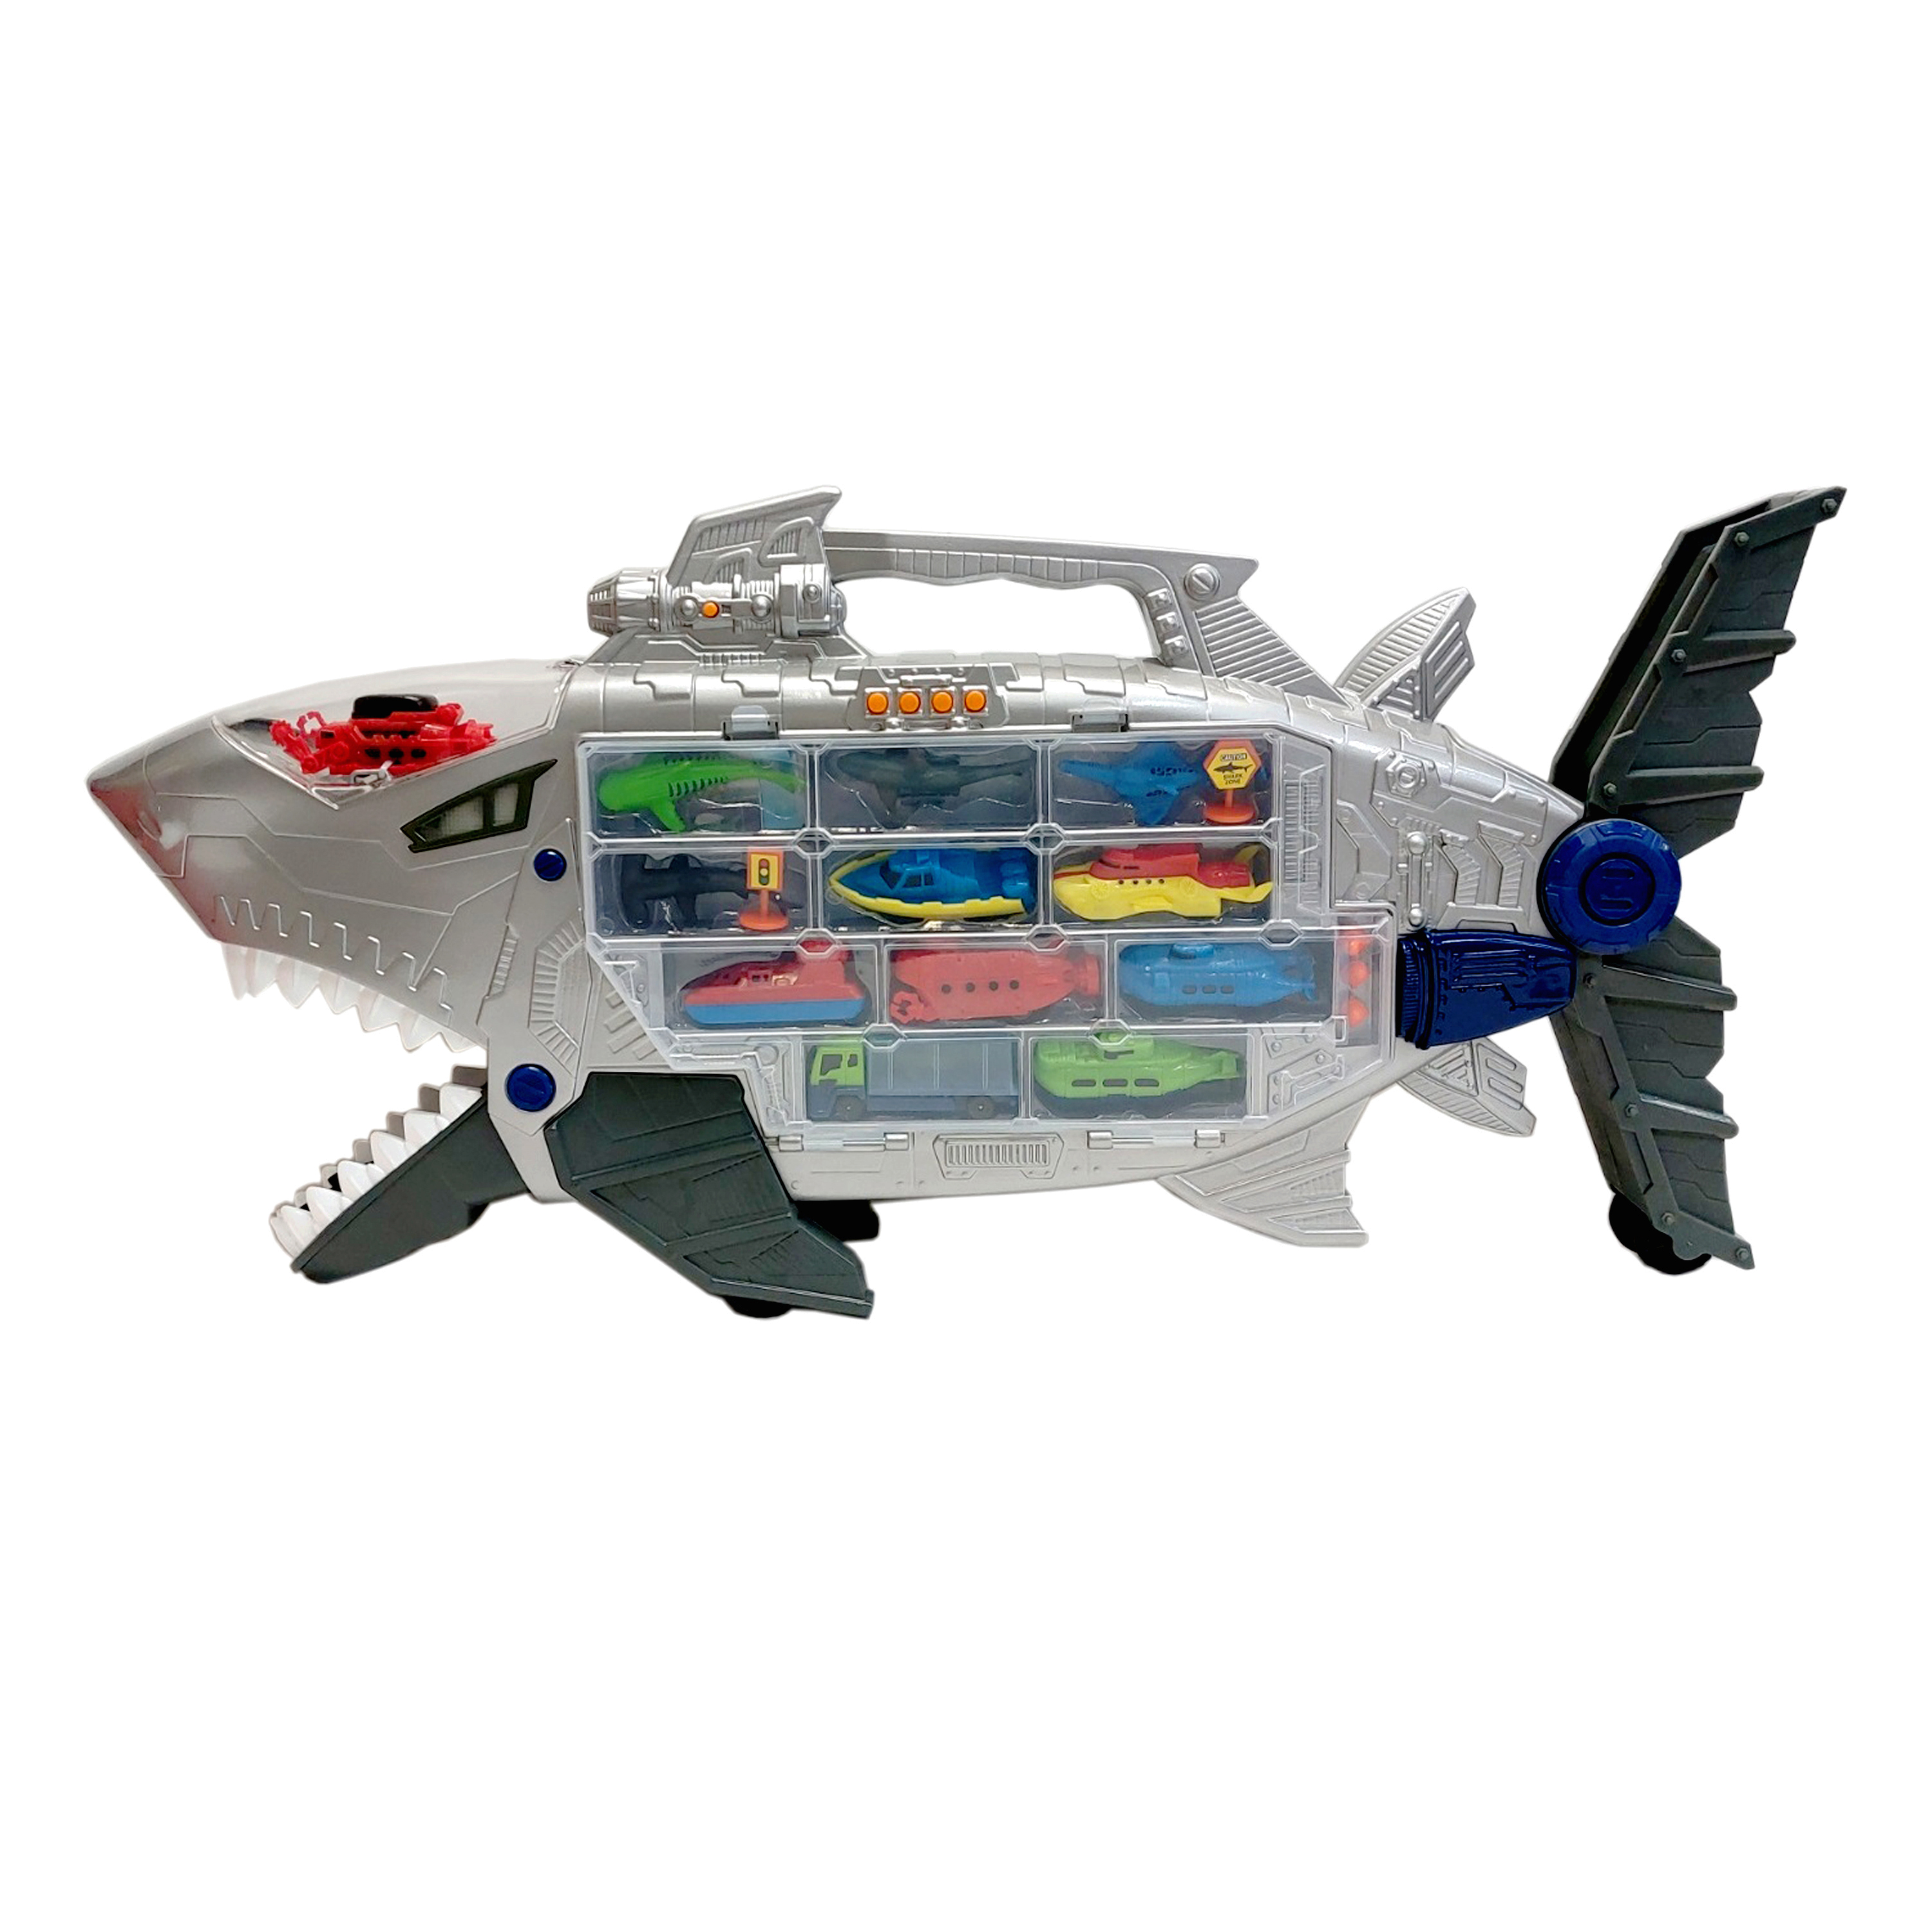 Kid Connection Shark Figure and Vehicle Transporter Play Set, 18 Pieces - image 2 of 6